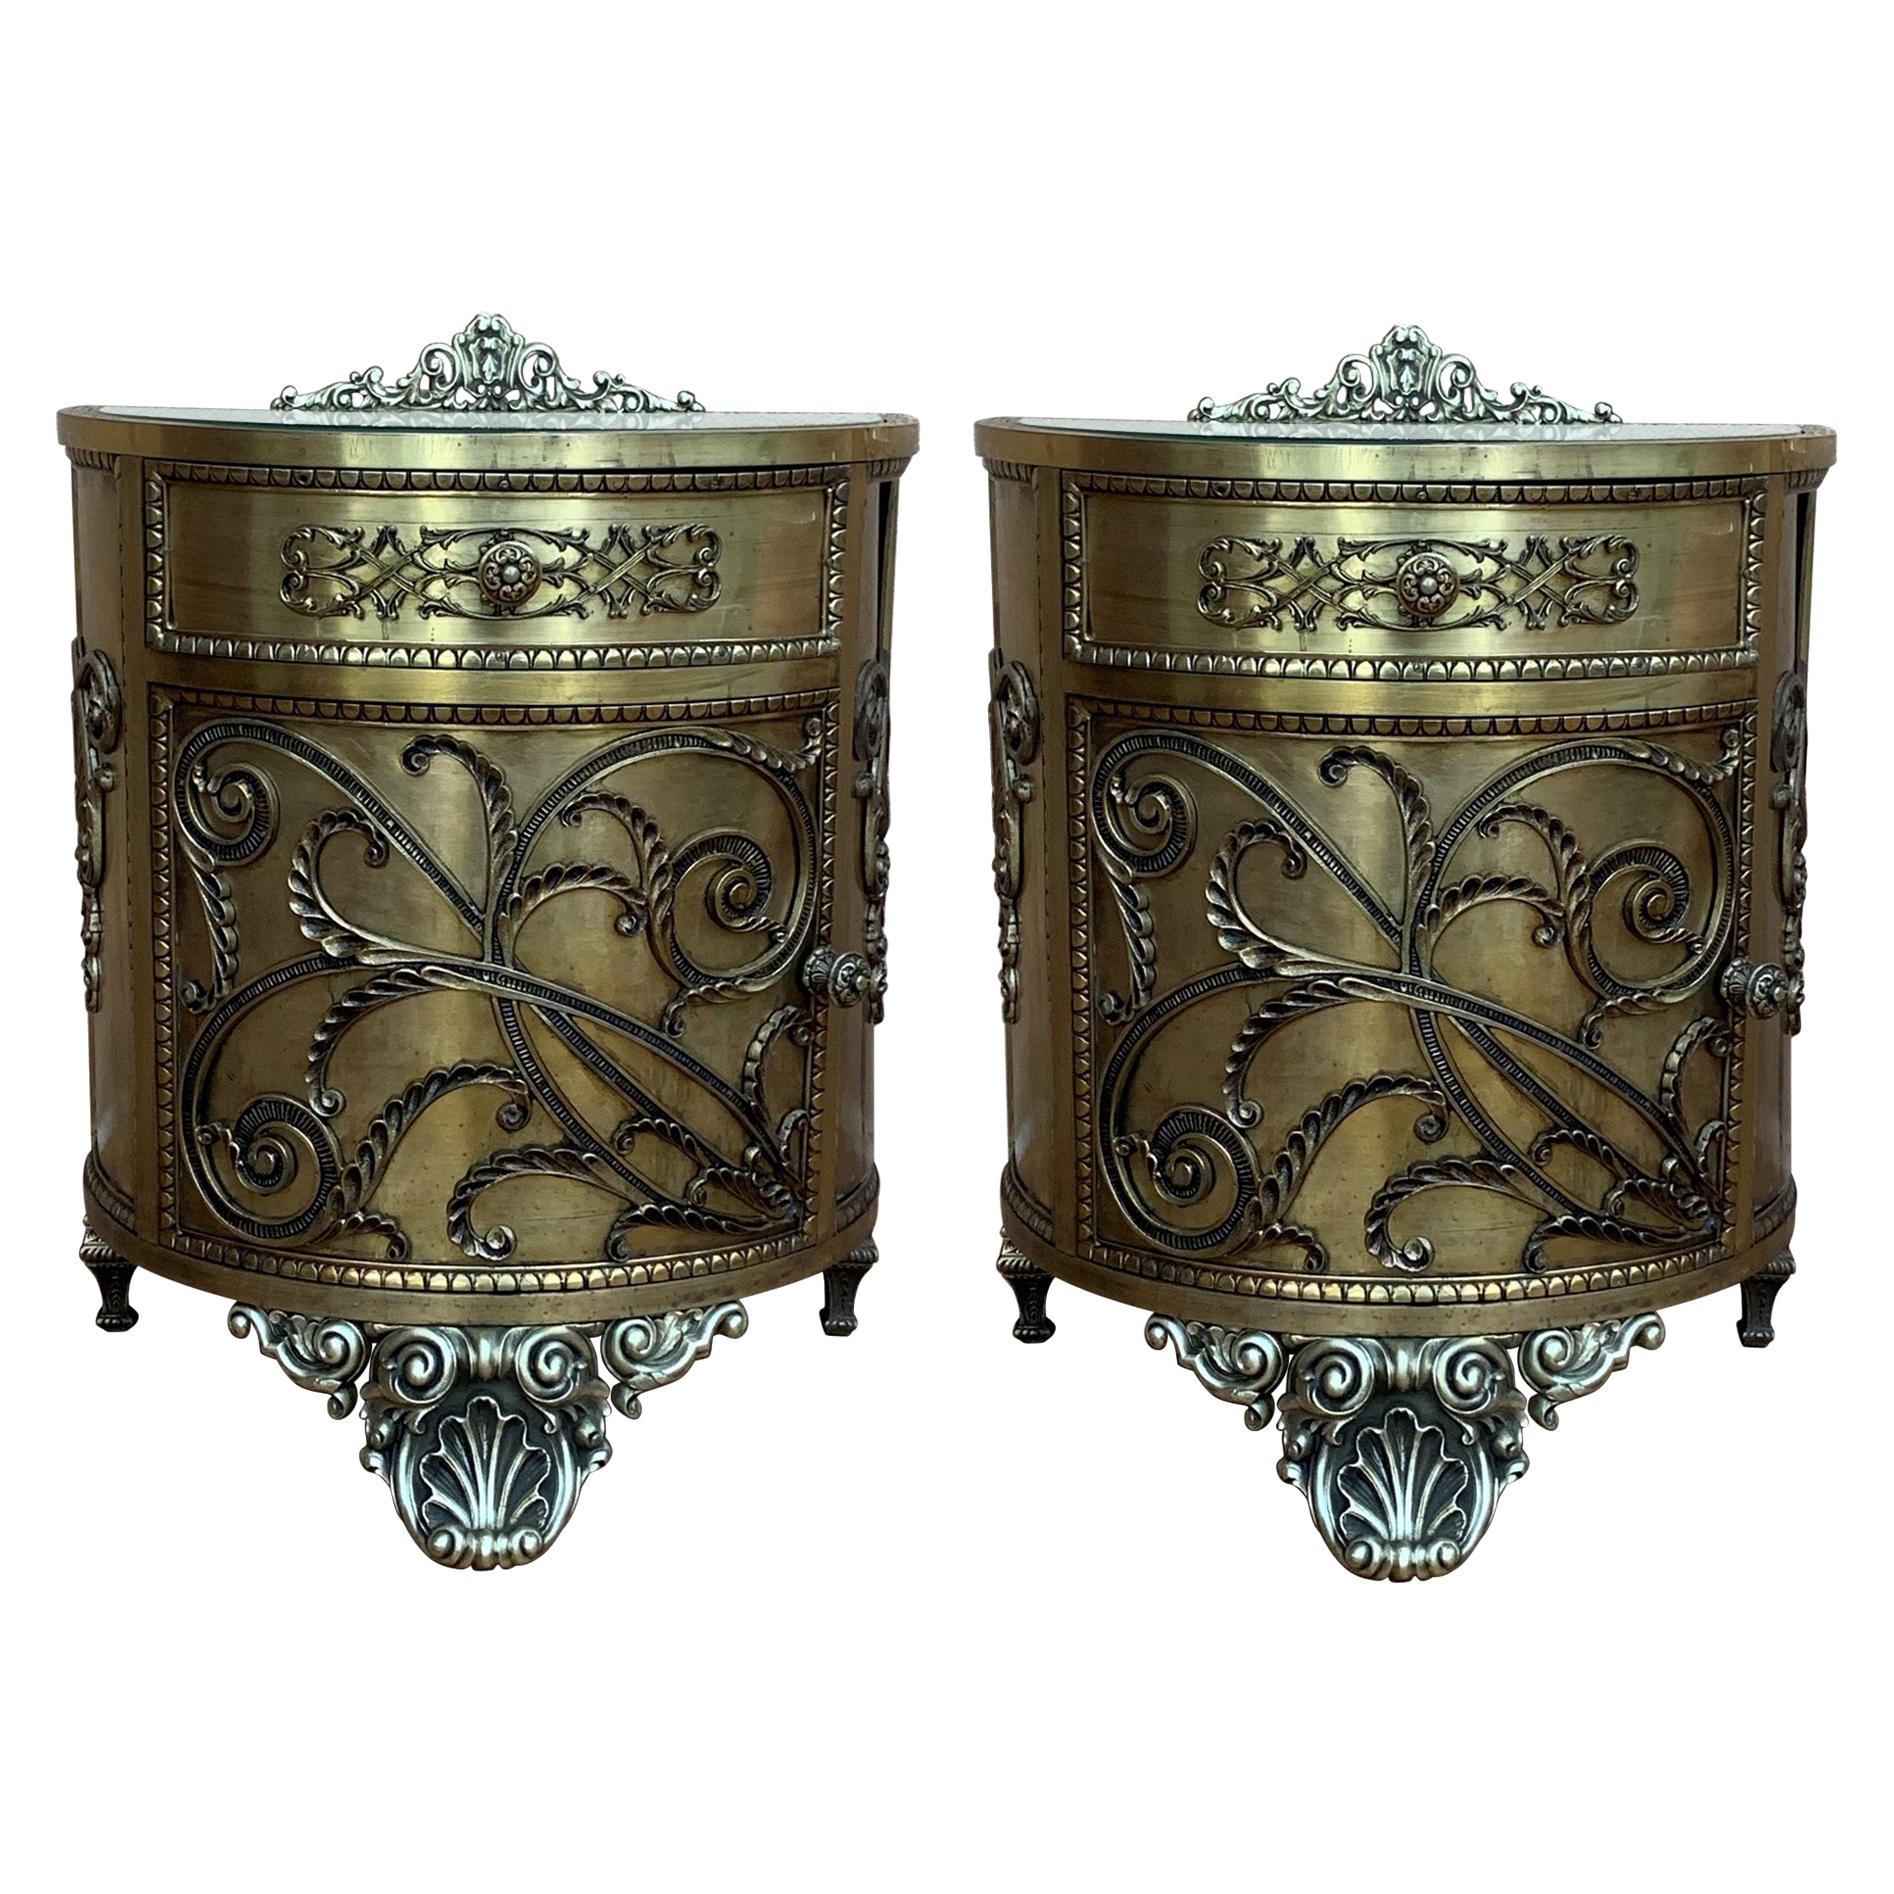 Antique Louis XVI Style Pair of Bronze / Brass Vitrine Cabinets or Nightstands